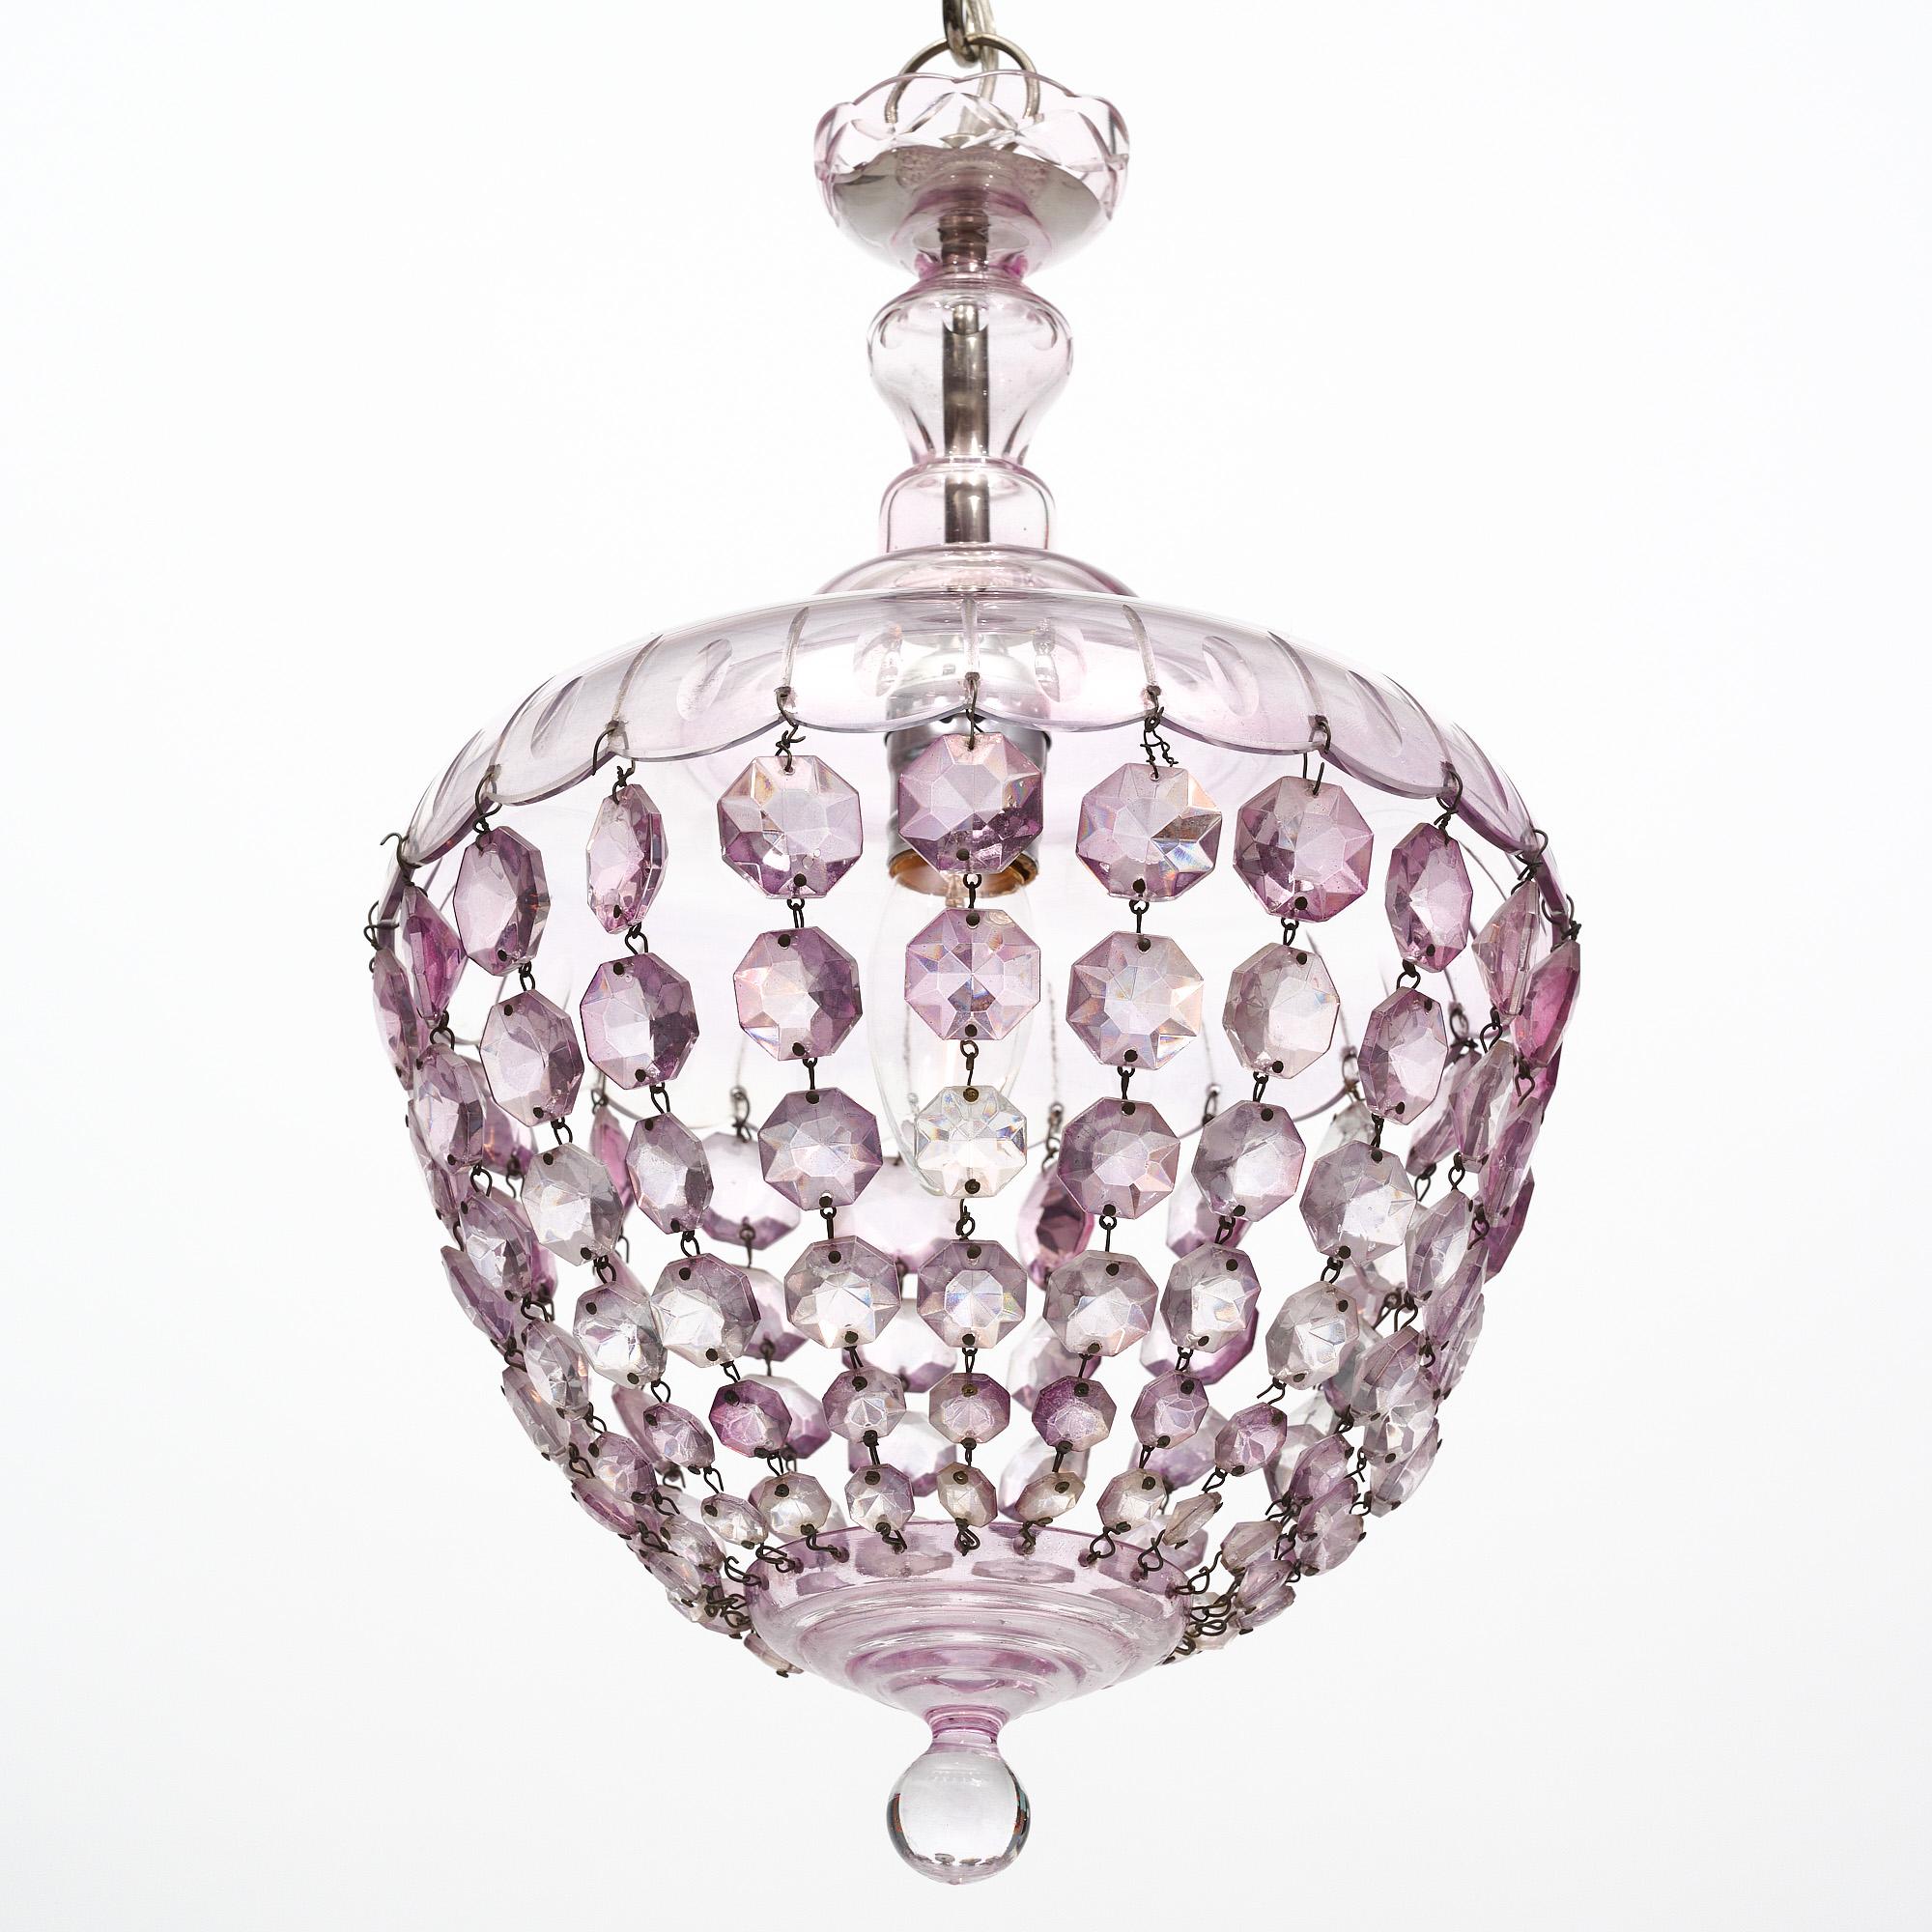 Chandelier from France in the iconic Baccarat bell shape. The crystal top holds strands of cut crystal elements that come together at the crystal finial. This piece is a lovely lavender color. It has been newly wired to fit US standards.
Current